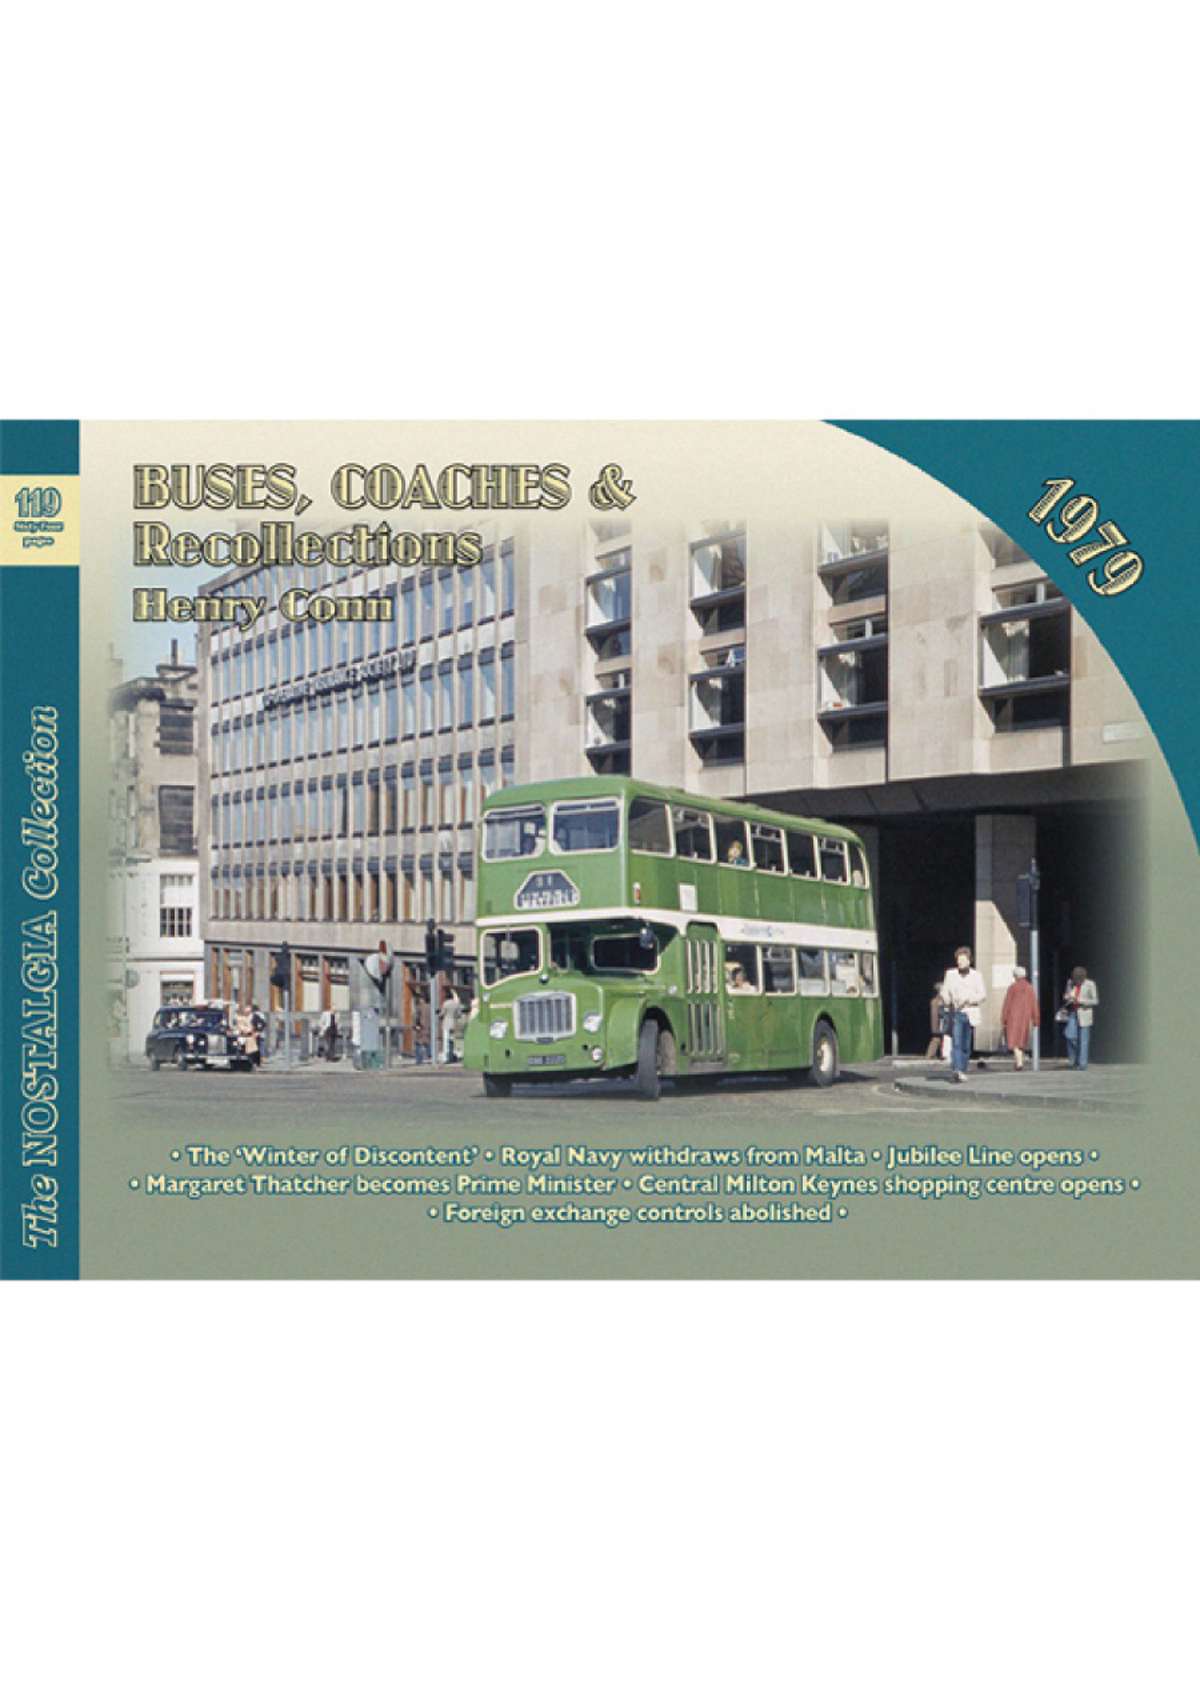 Buses, Coaches & Recollections 1979. 